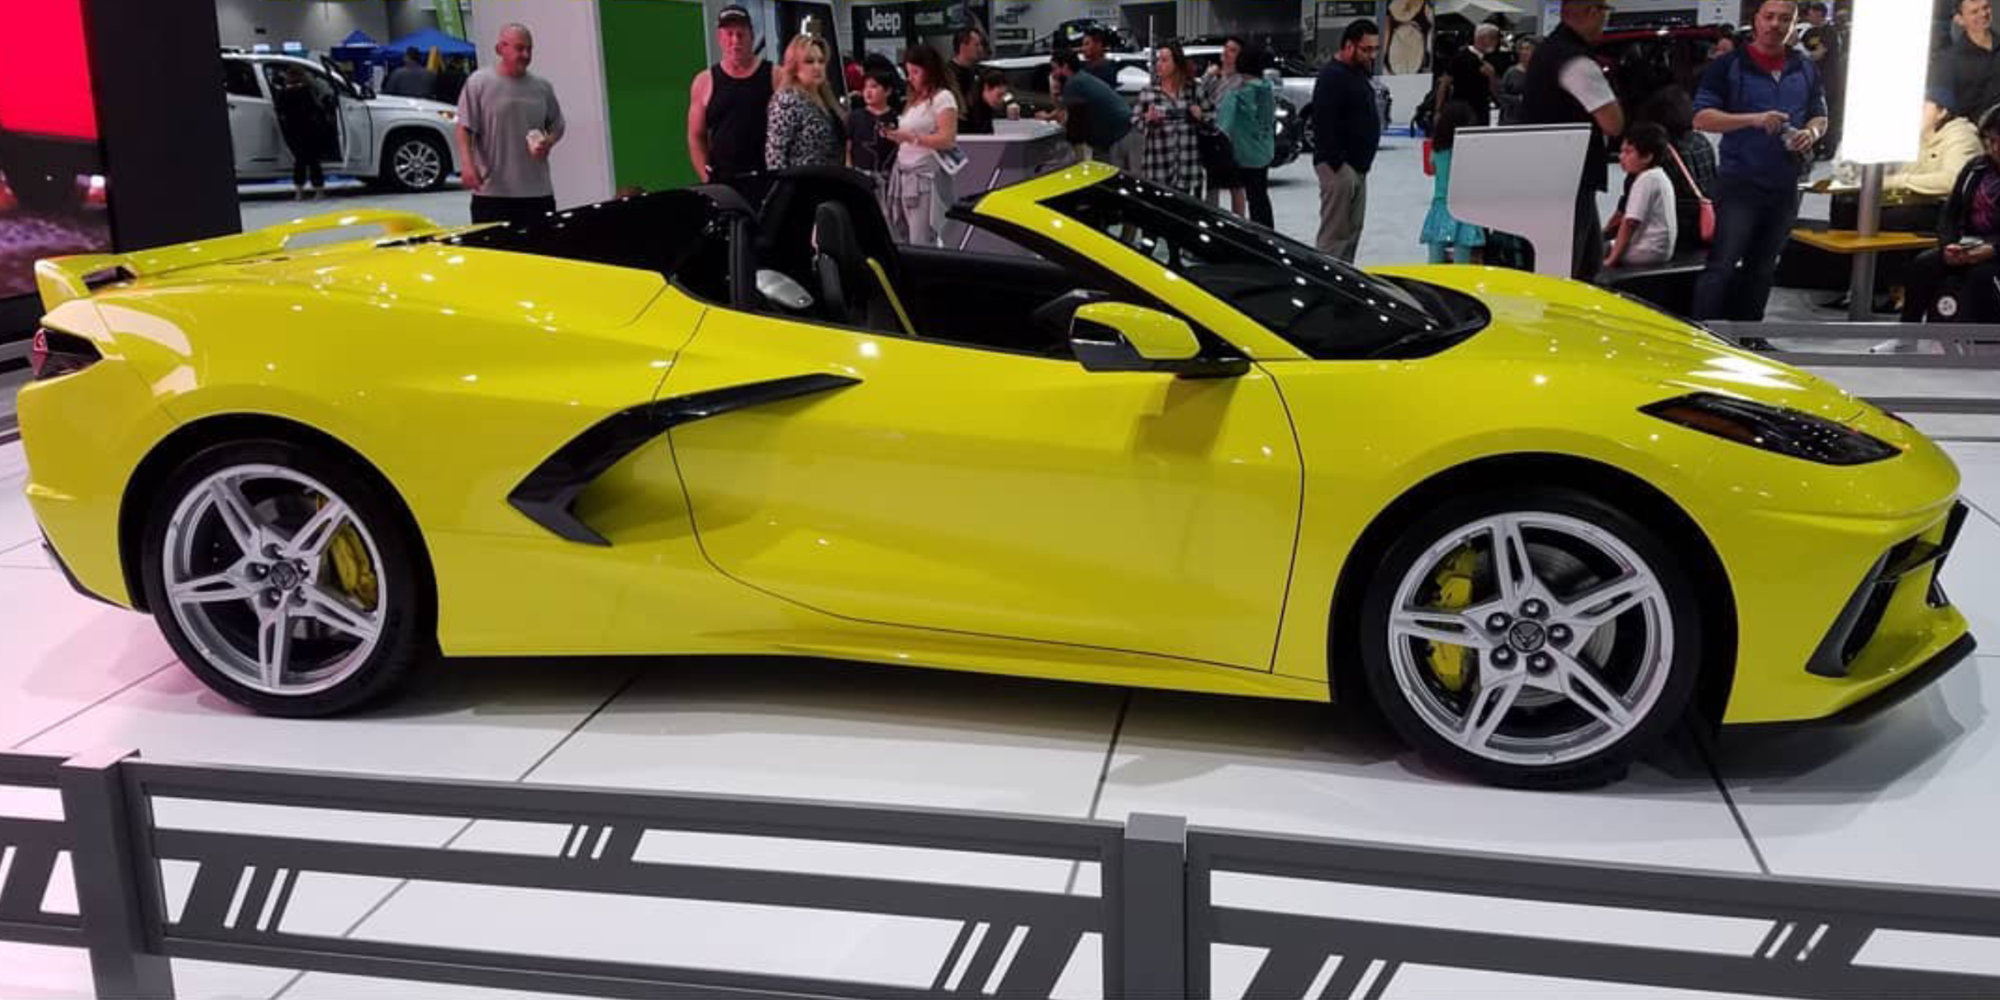 C8 picture thread *AFTER REVEAL* - Page 65 - CorvetteForum - Chevrolet